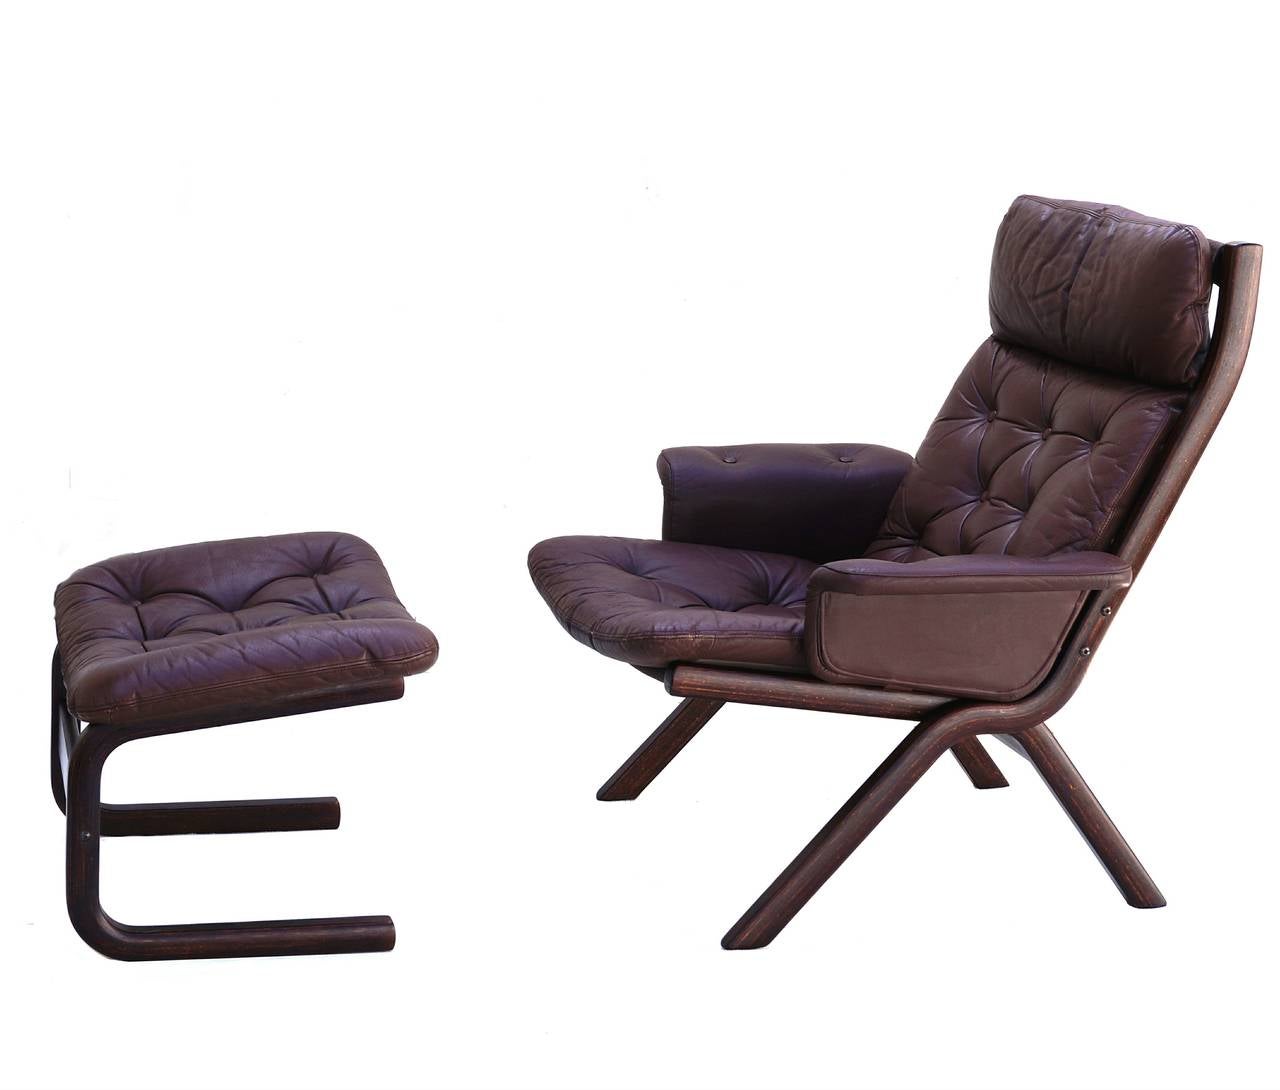 Unusual leather sling Danish modern sculptural lounge chair and ottoman. The ottoman measures 17